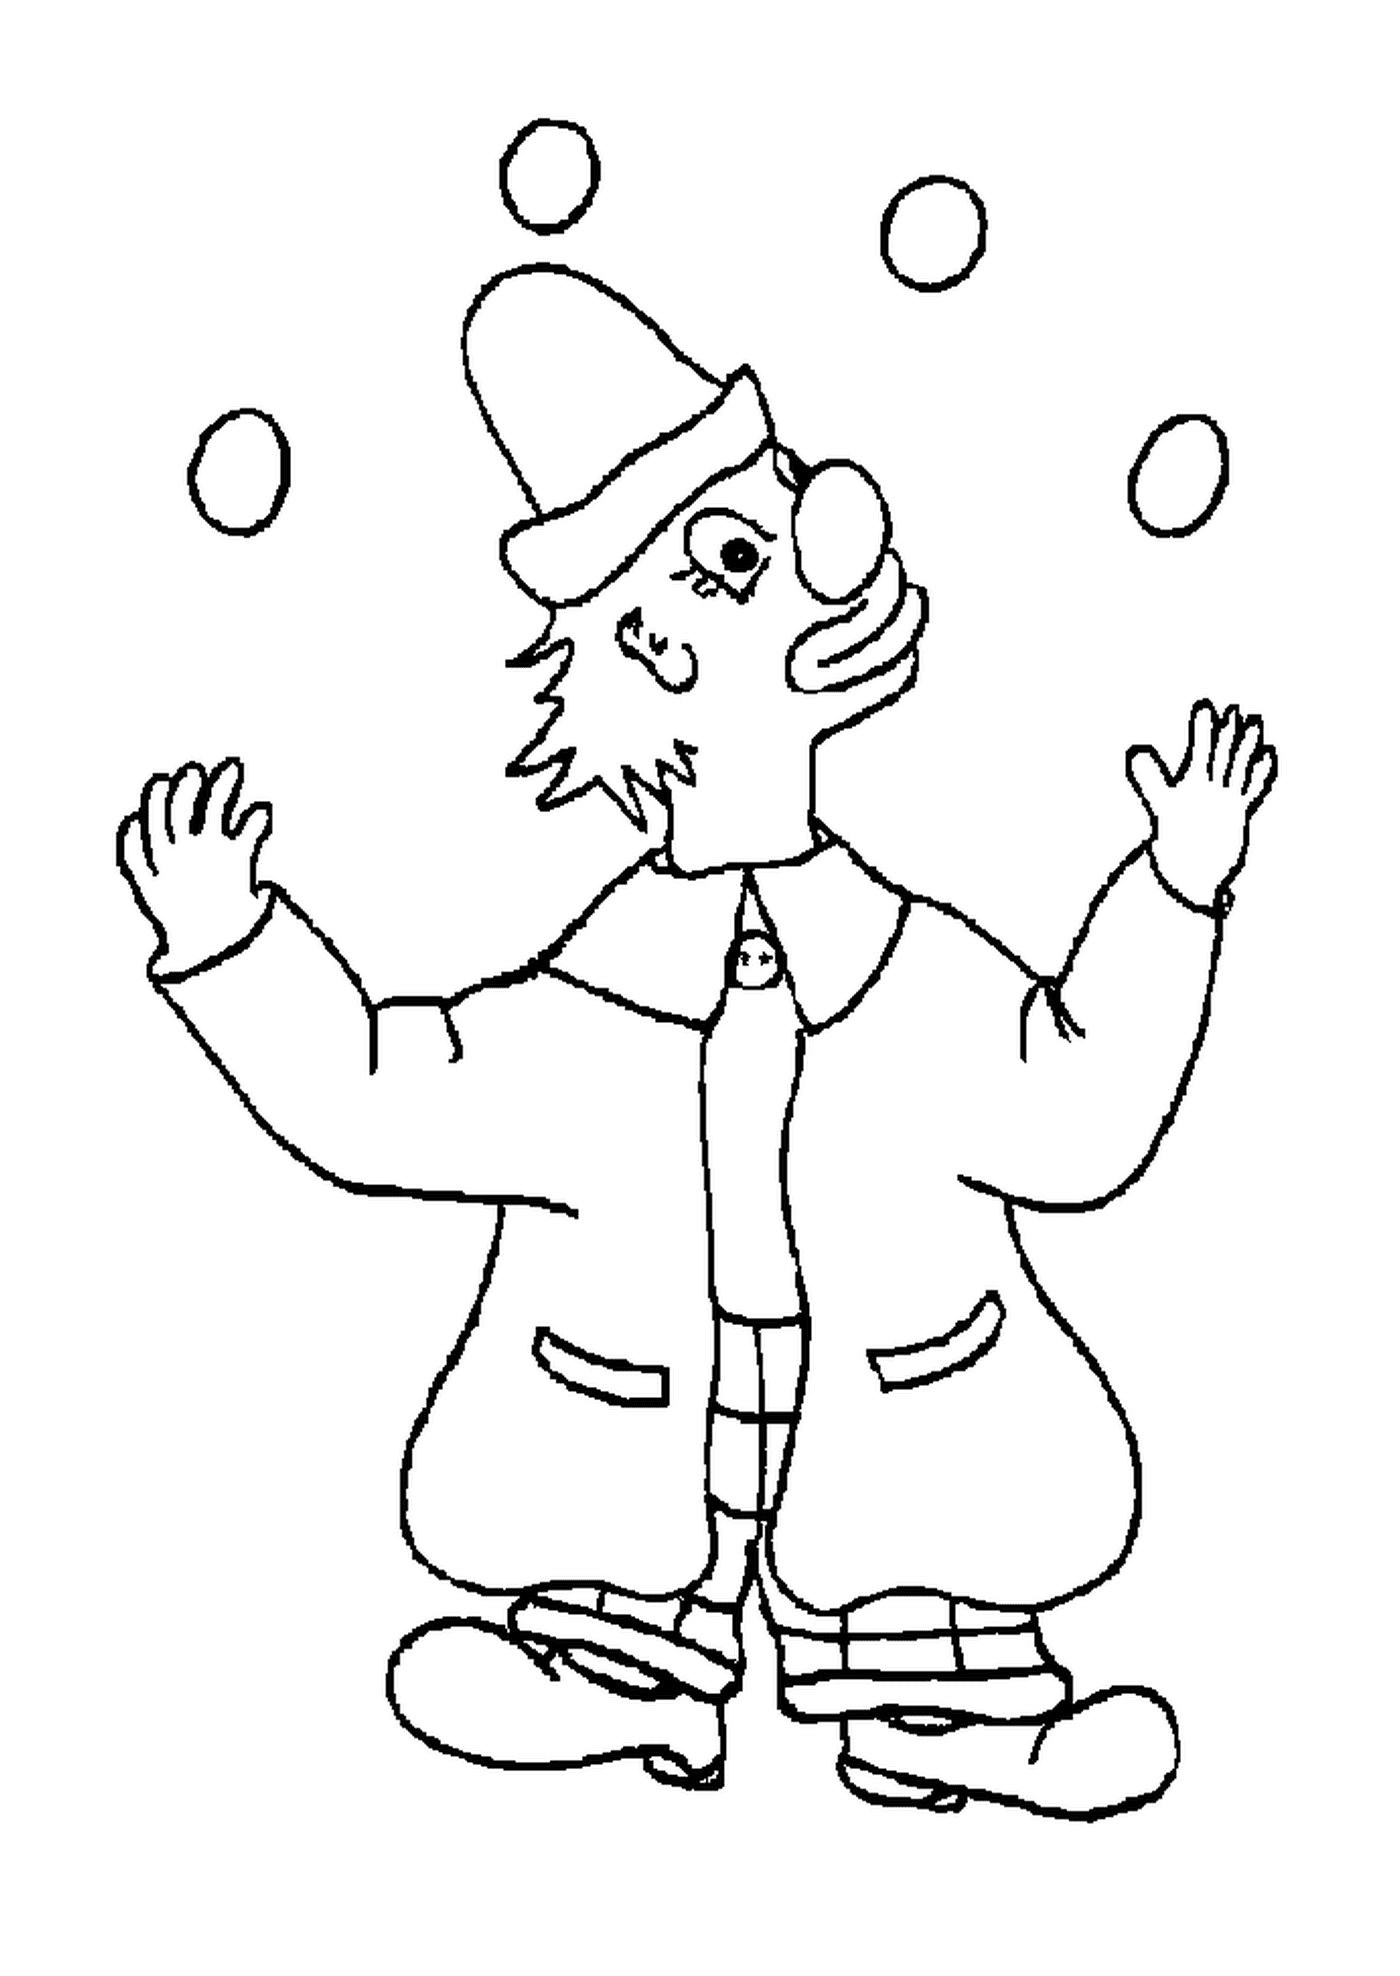  A clown juggling with balls for the circus 